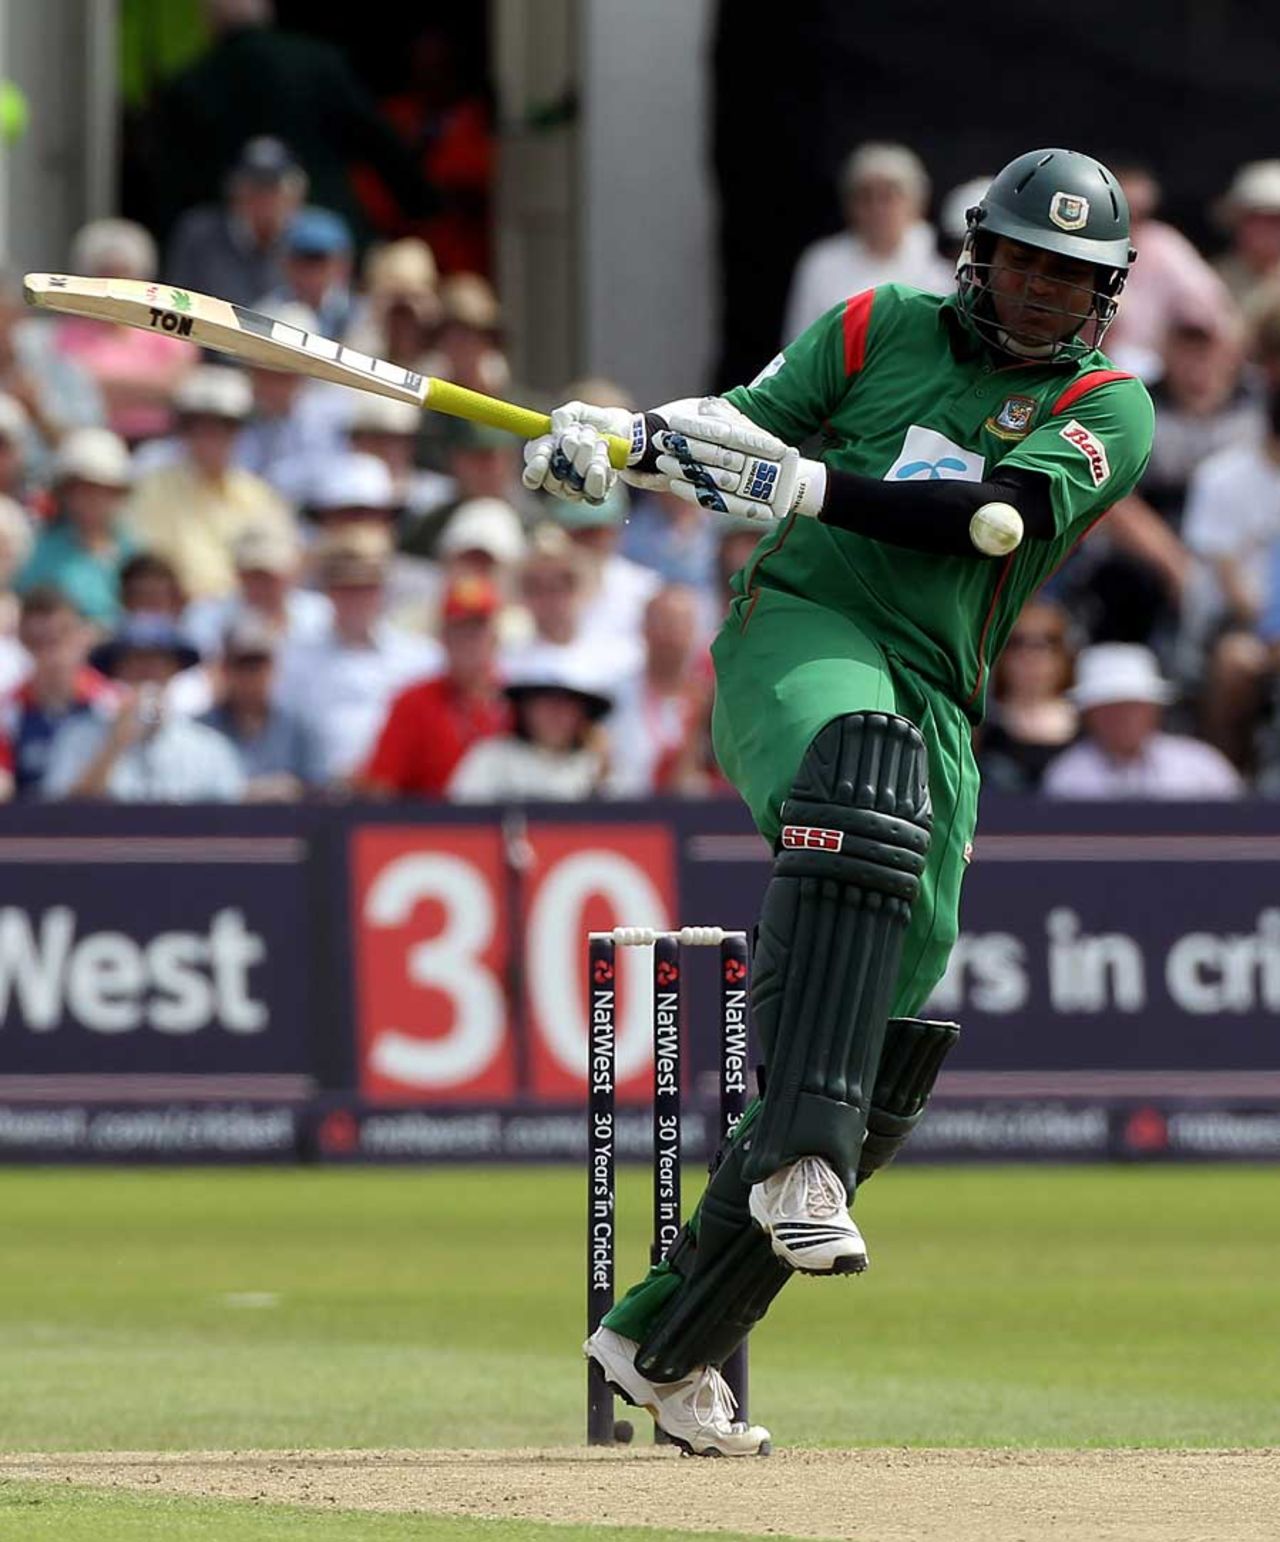 Junaid Siddique was given a working over by the short ball, England v Bangldesh, 1st ODI, Trent Bridge, July 8, 2010